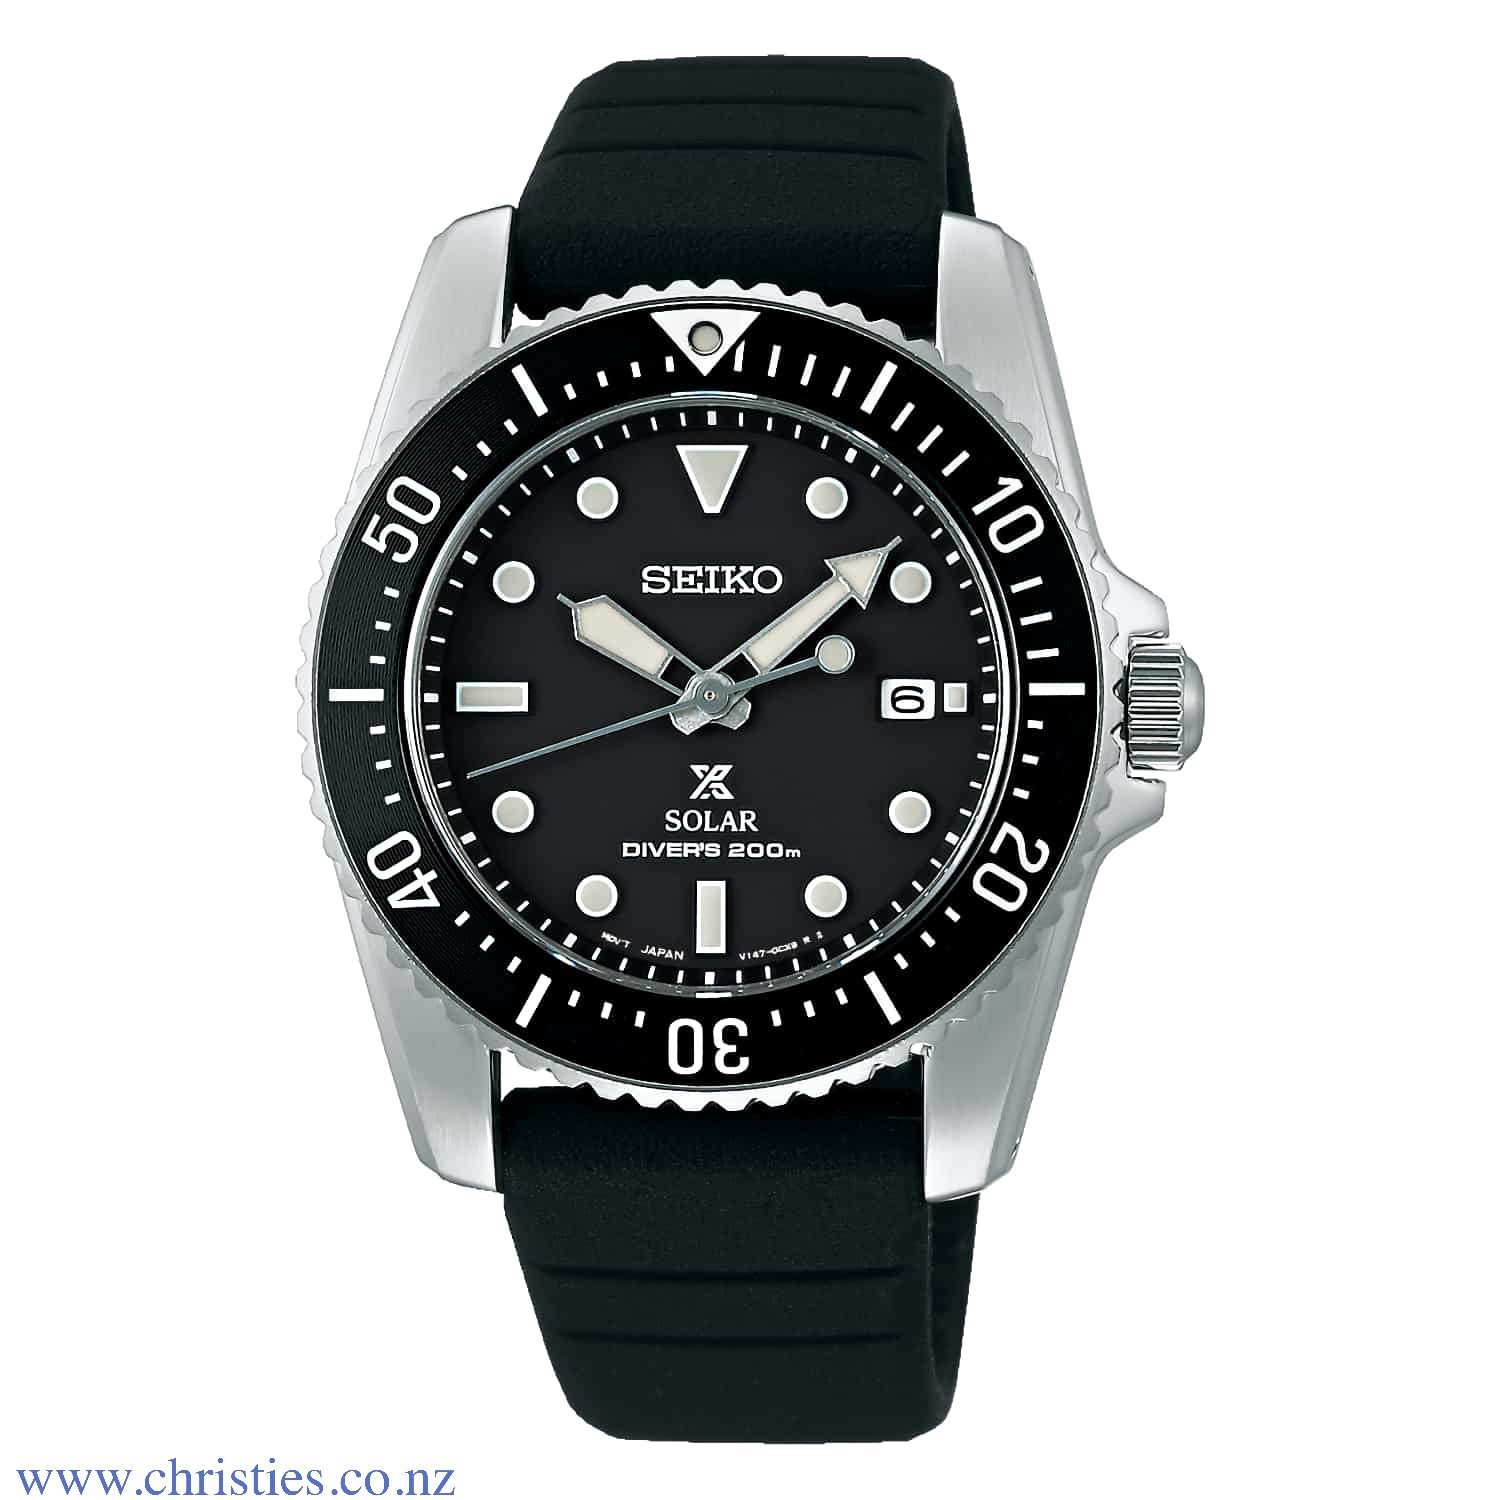 SNE573P1 Seiko Solar Prospex Dive Watch. SNE573P1 Seiko Solar Prospex Dive Watch   LAYBUY - Pay it easy, in 6 weekly payments and have it now. Only pay the price of your purchase, when you pay your instalments on time. A late fee may be applied for buy se